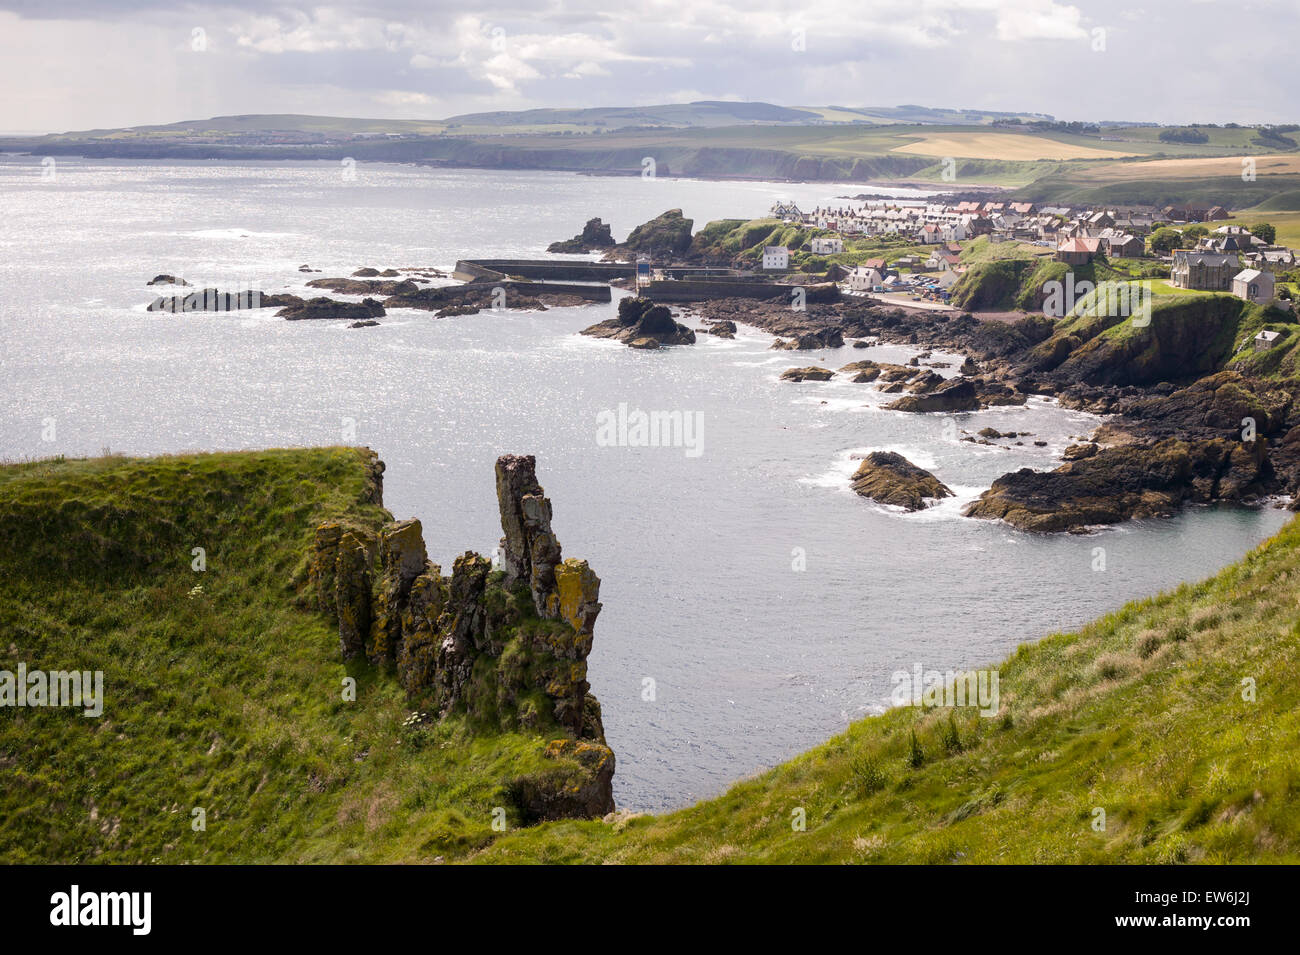 The village of St. Abbs and the coast of North East England. Stock Photo